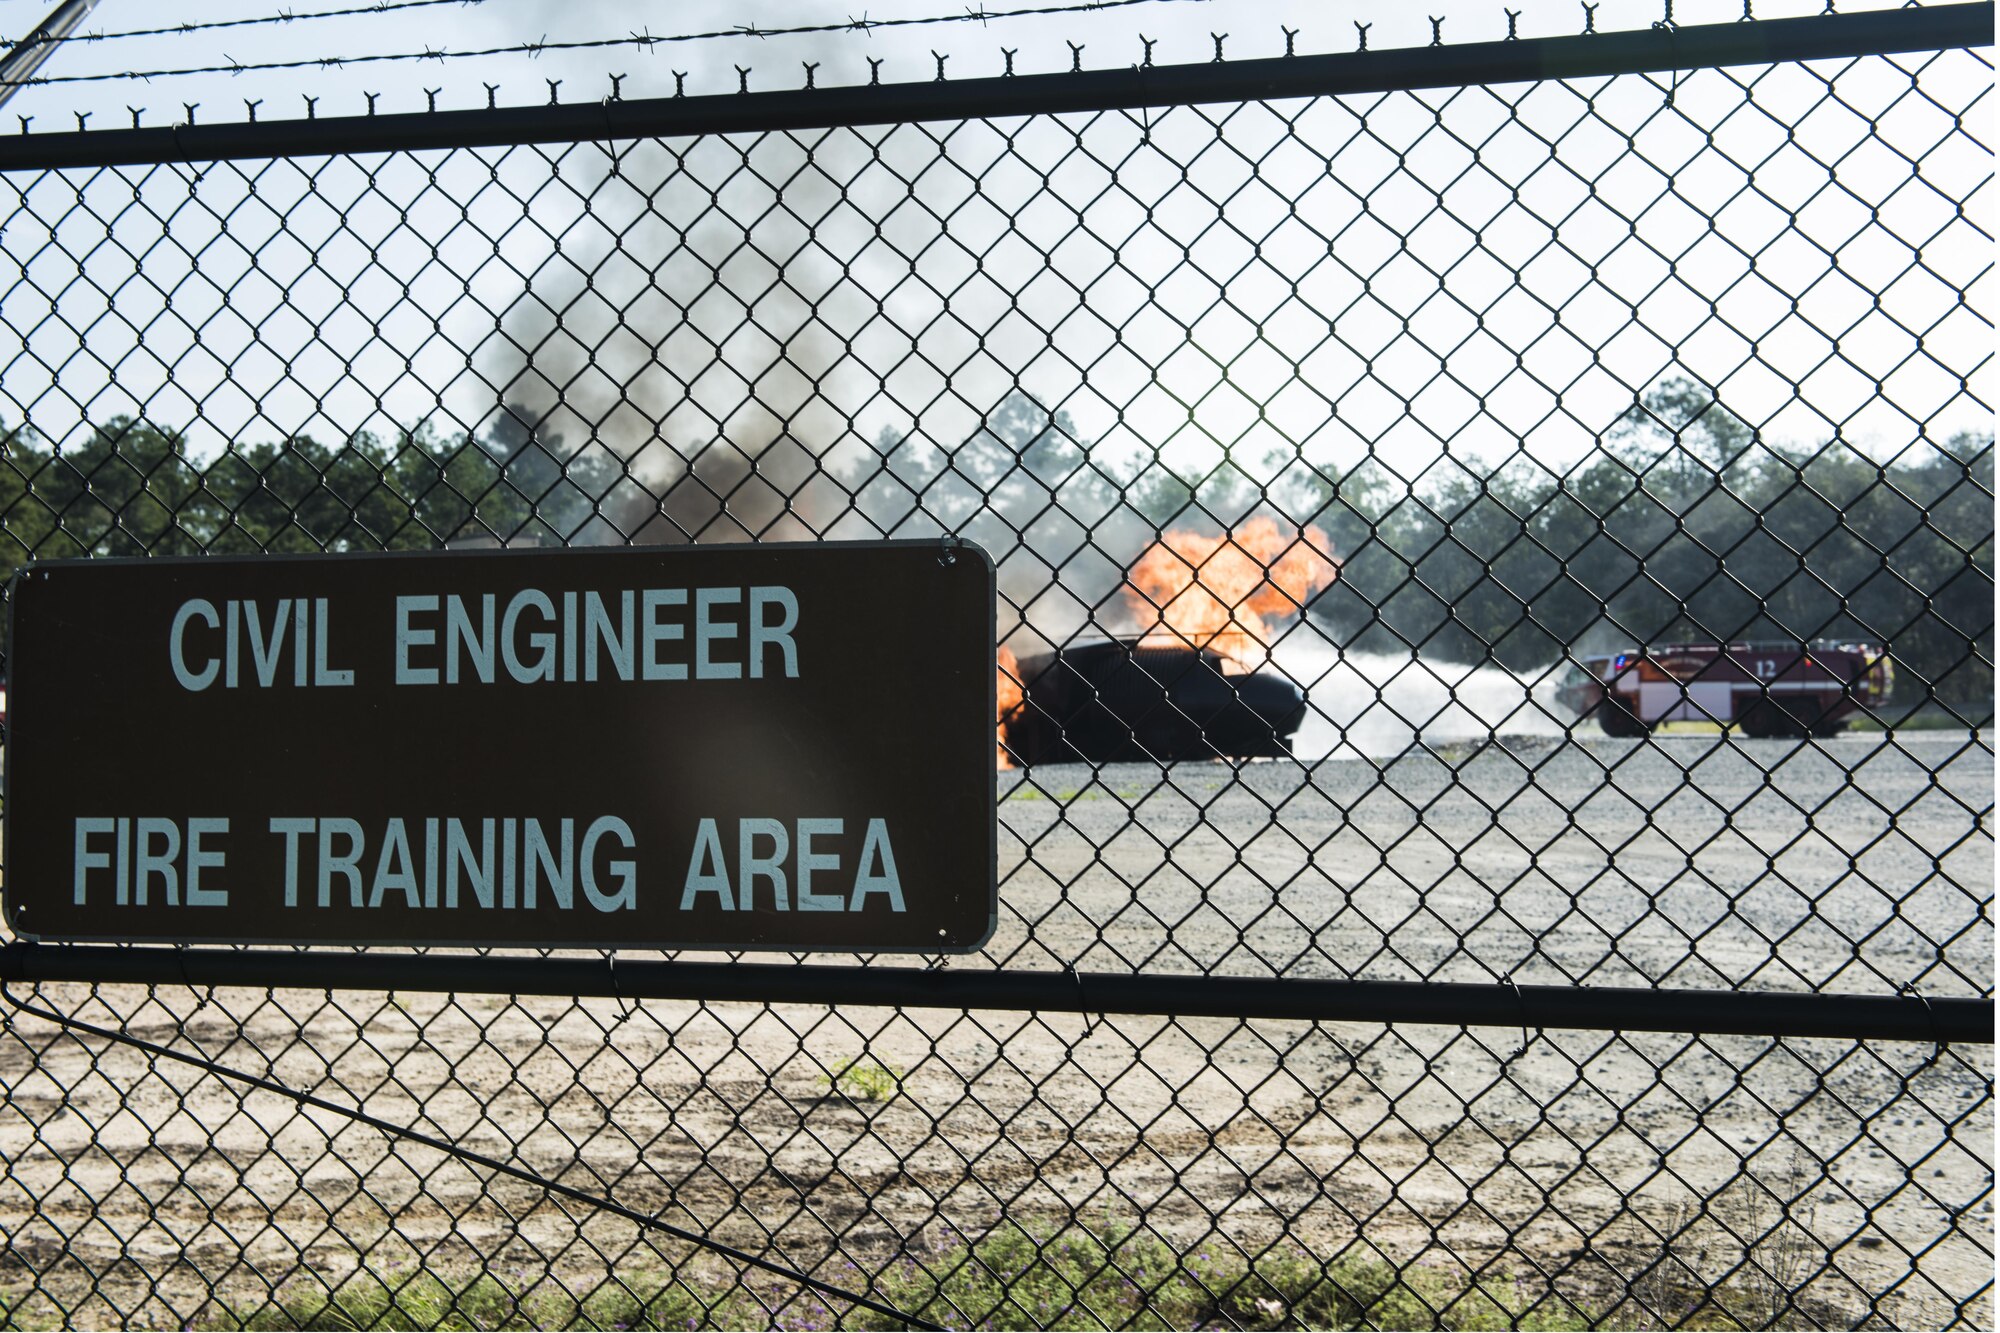 Firefighters from the 23d Civil Engineer Squadron conduct live fire training at Moody Air Force Base, Ga., Aug. 24, 2017. All of Moody’s firefighters are required to perform this training at least once a year. (U.S. Air Force photo by Staff Sgt. Olivia Dominique)